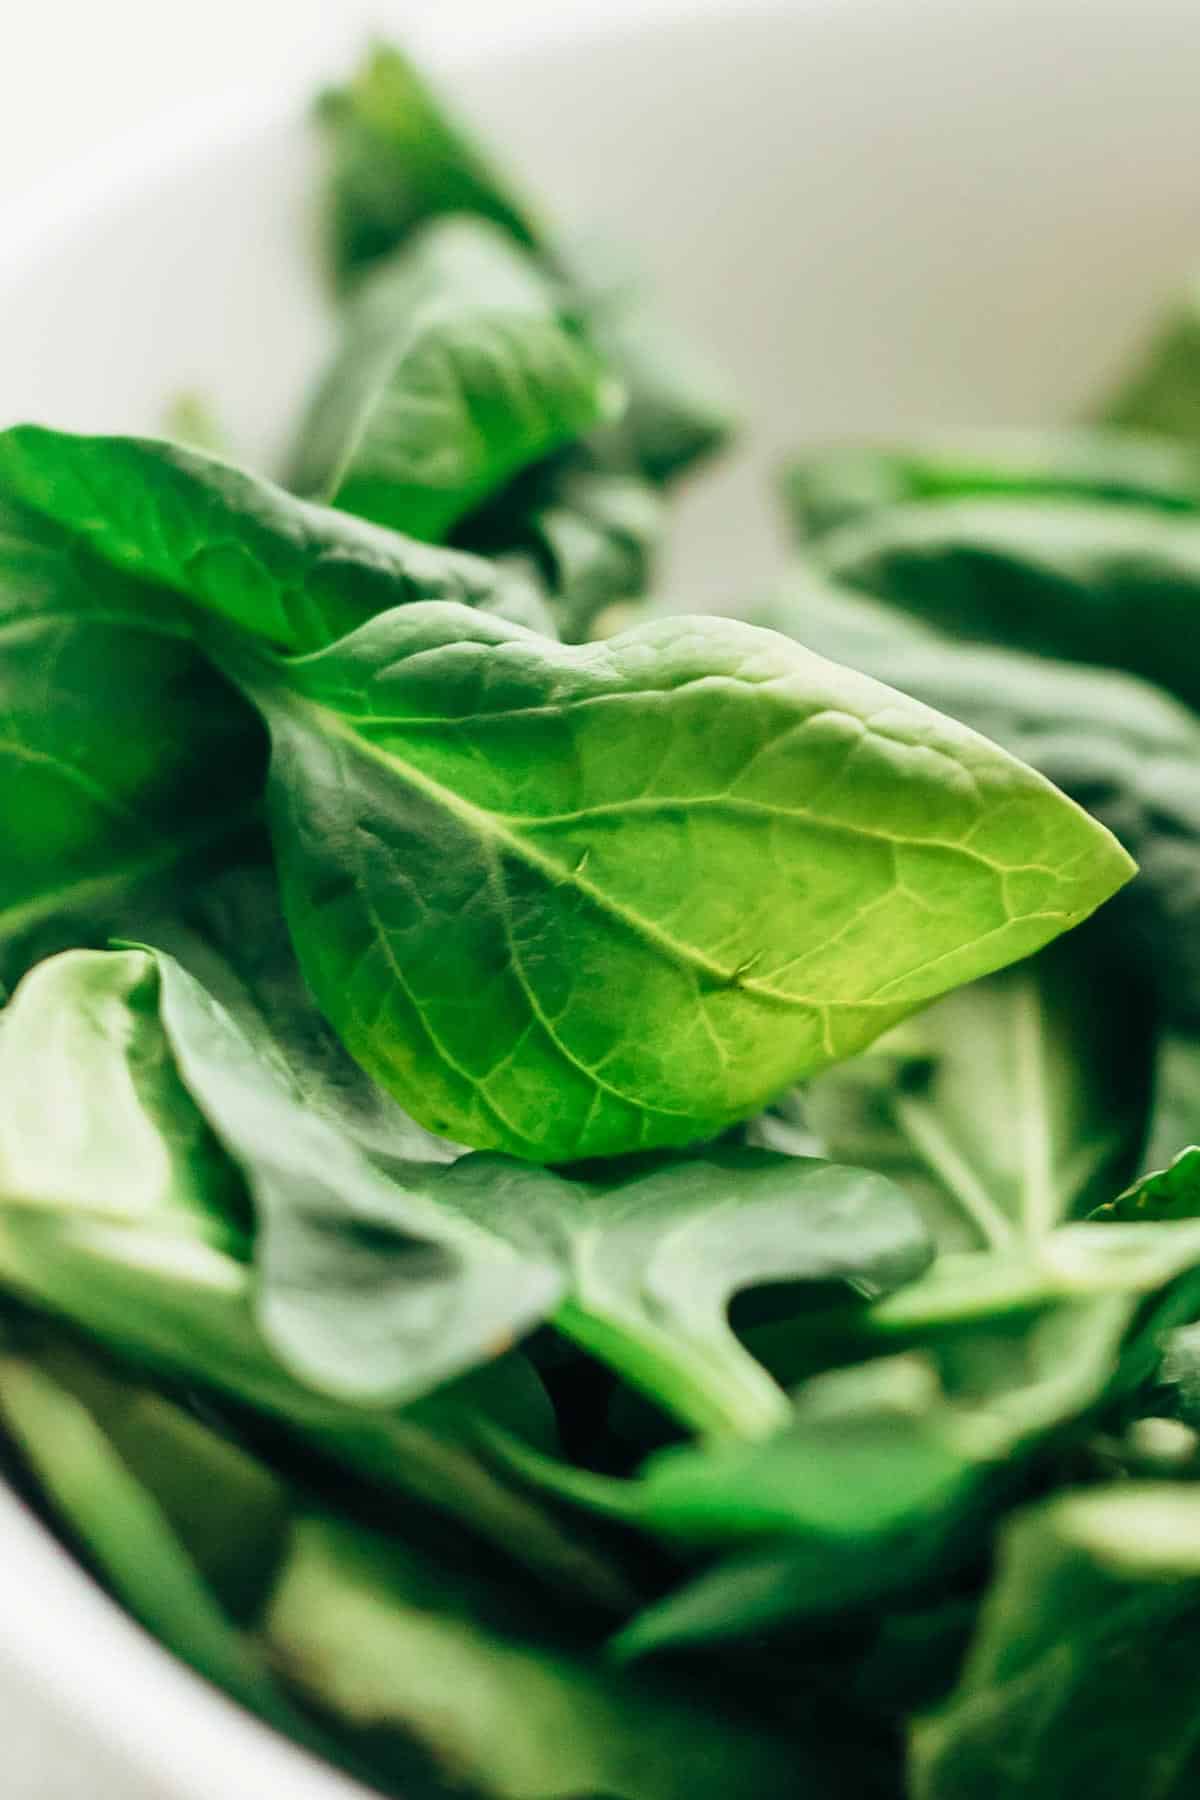 Spinach leaves used in spinach mushroom stuffed chicken.